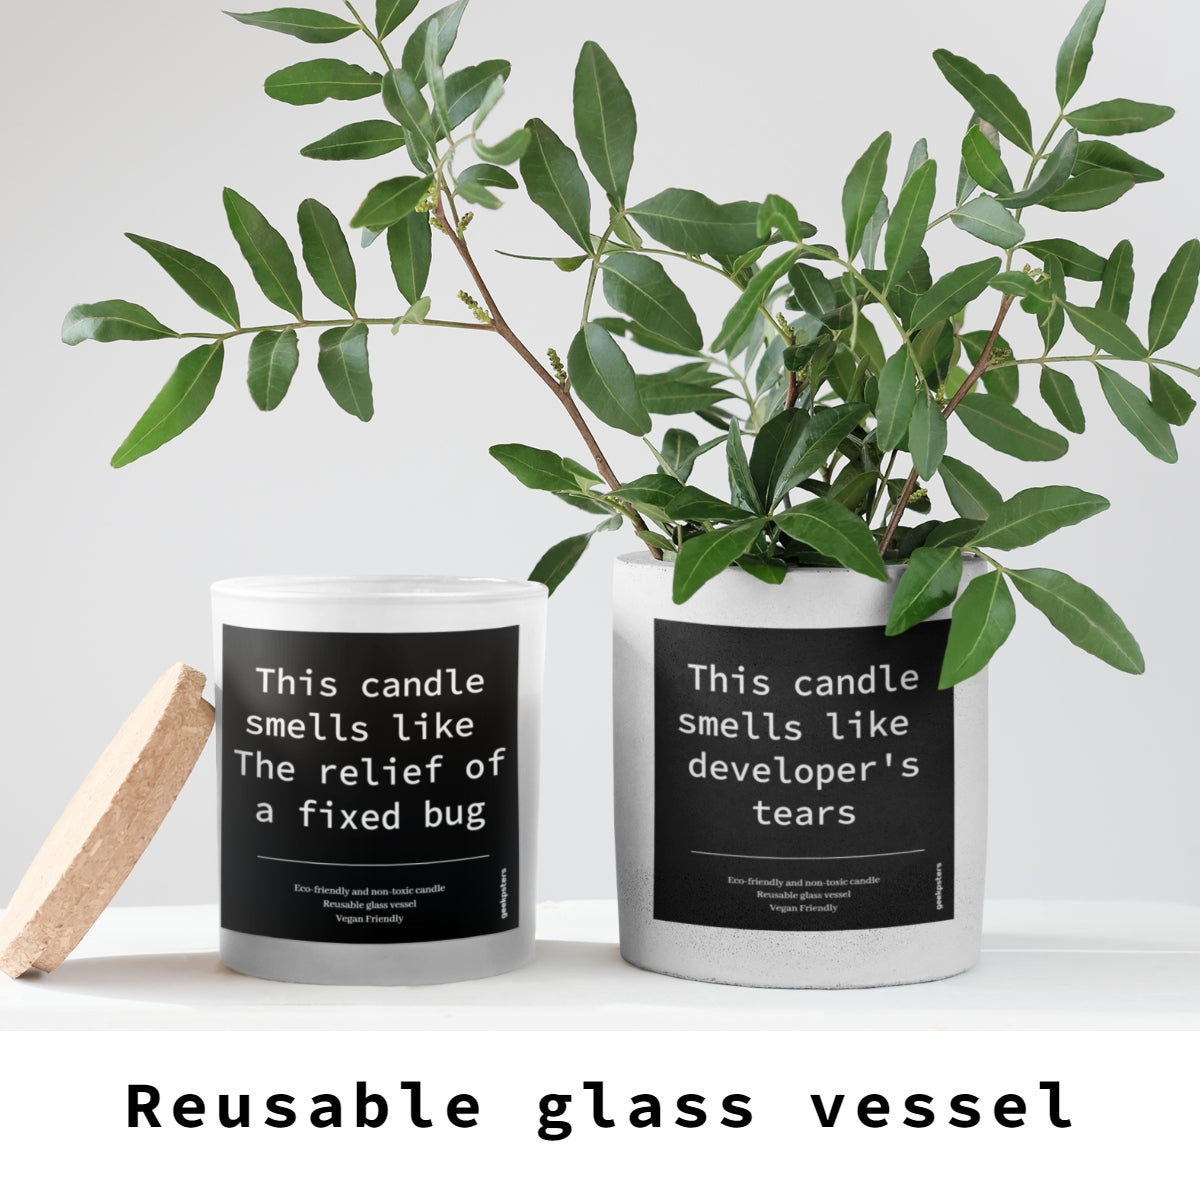 Two This Candle Smells Like a Heated Debate About Code Style- Scented Soy Candles in reusable glass jars with humorous labels, accompanied by a green plant branch and a wooden item on a grey background.